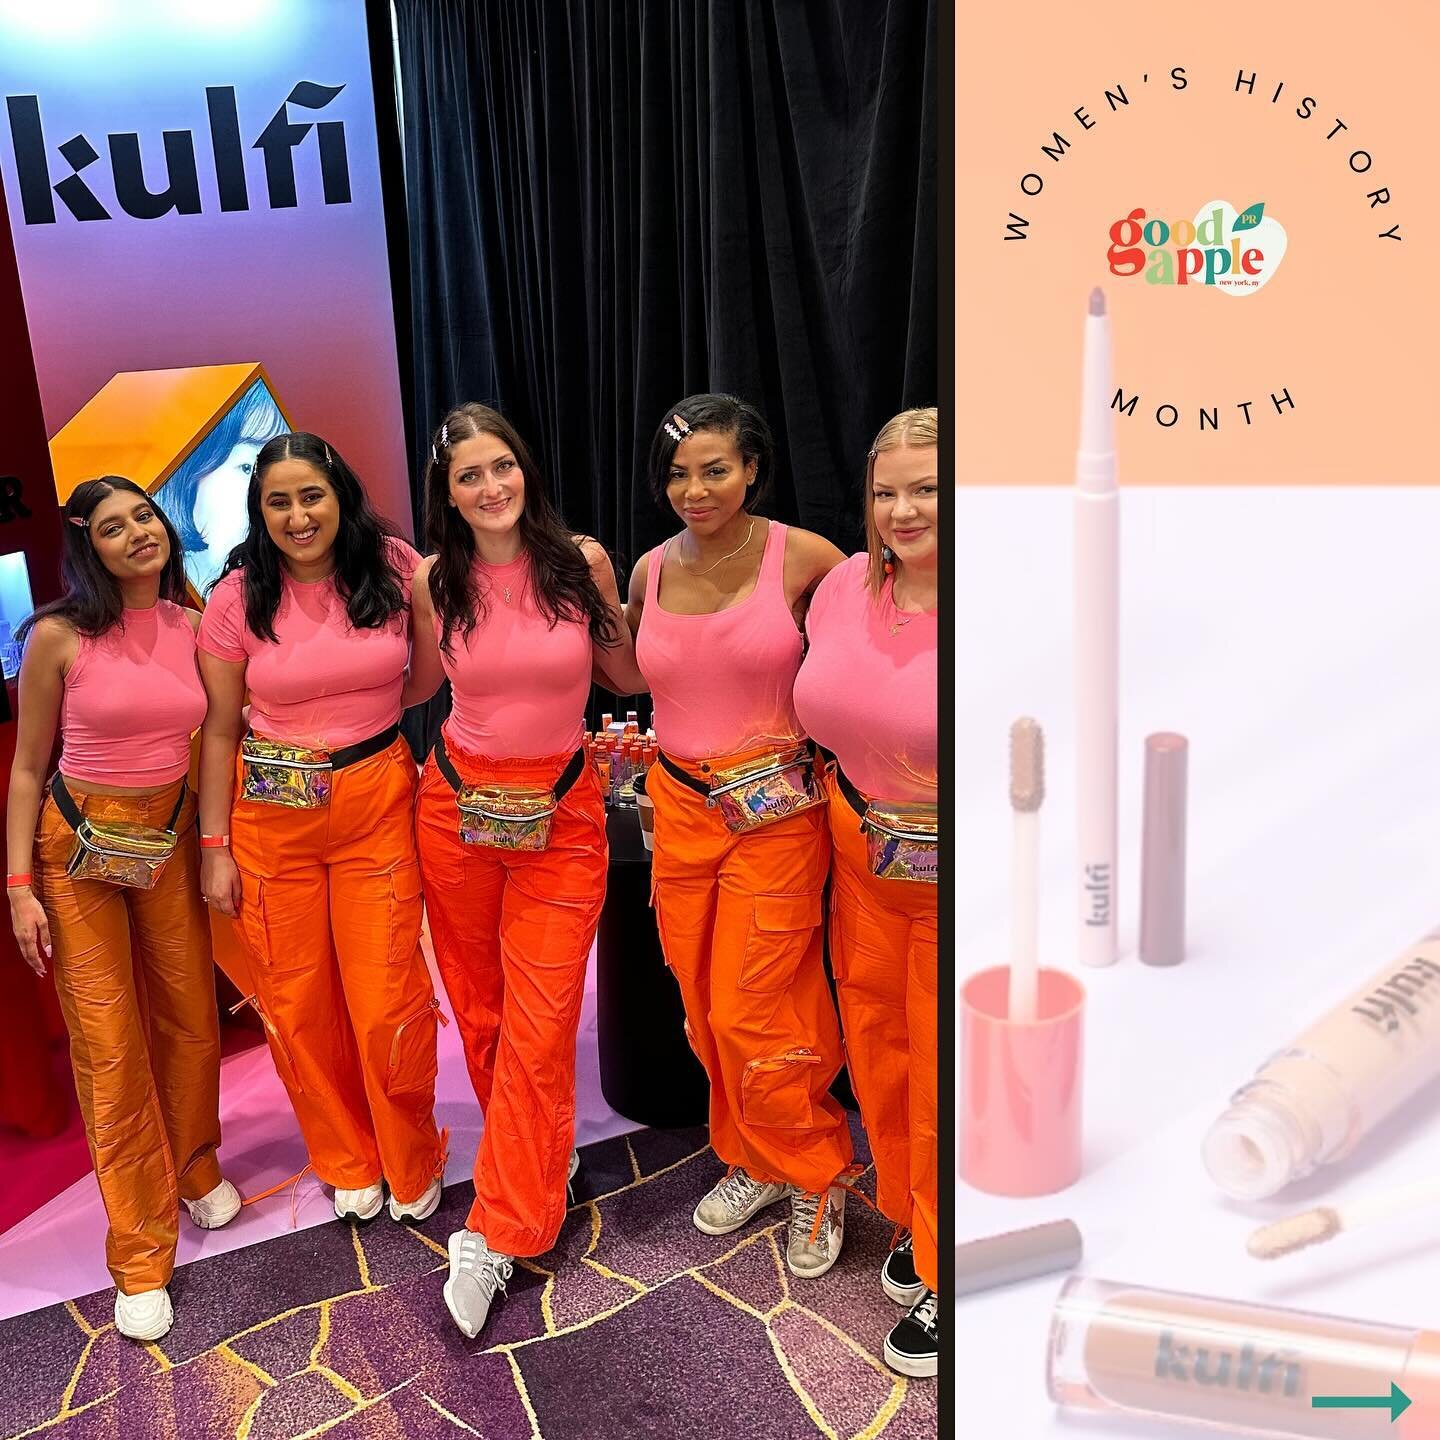 #ClientSpotlight: Meet the inspiring women of the @kulfi.beauty team! @priyankaganjoo journey is reshaping beauty standards and we&rsquo;re thrilled to be part of this incredible community of strong women. Swipe to see some of our favorite press high